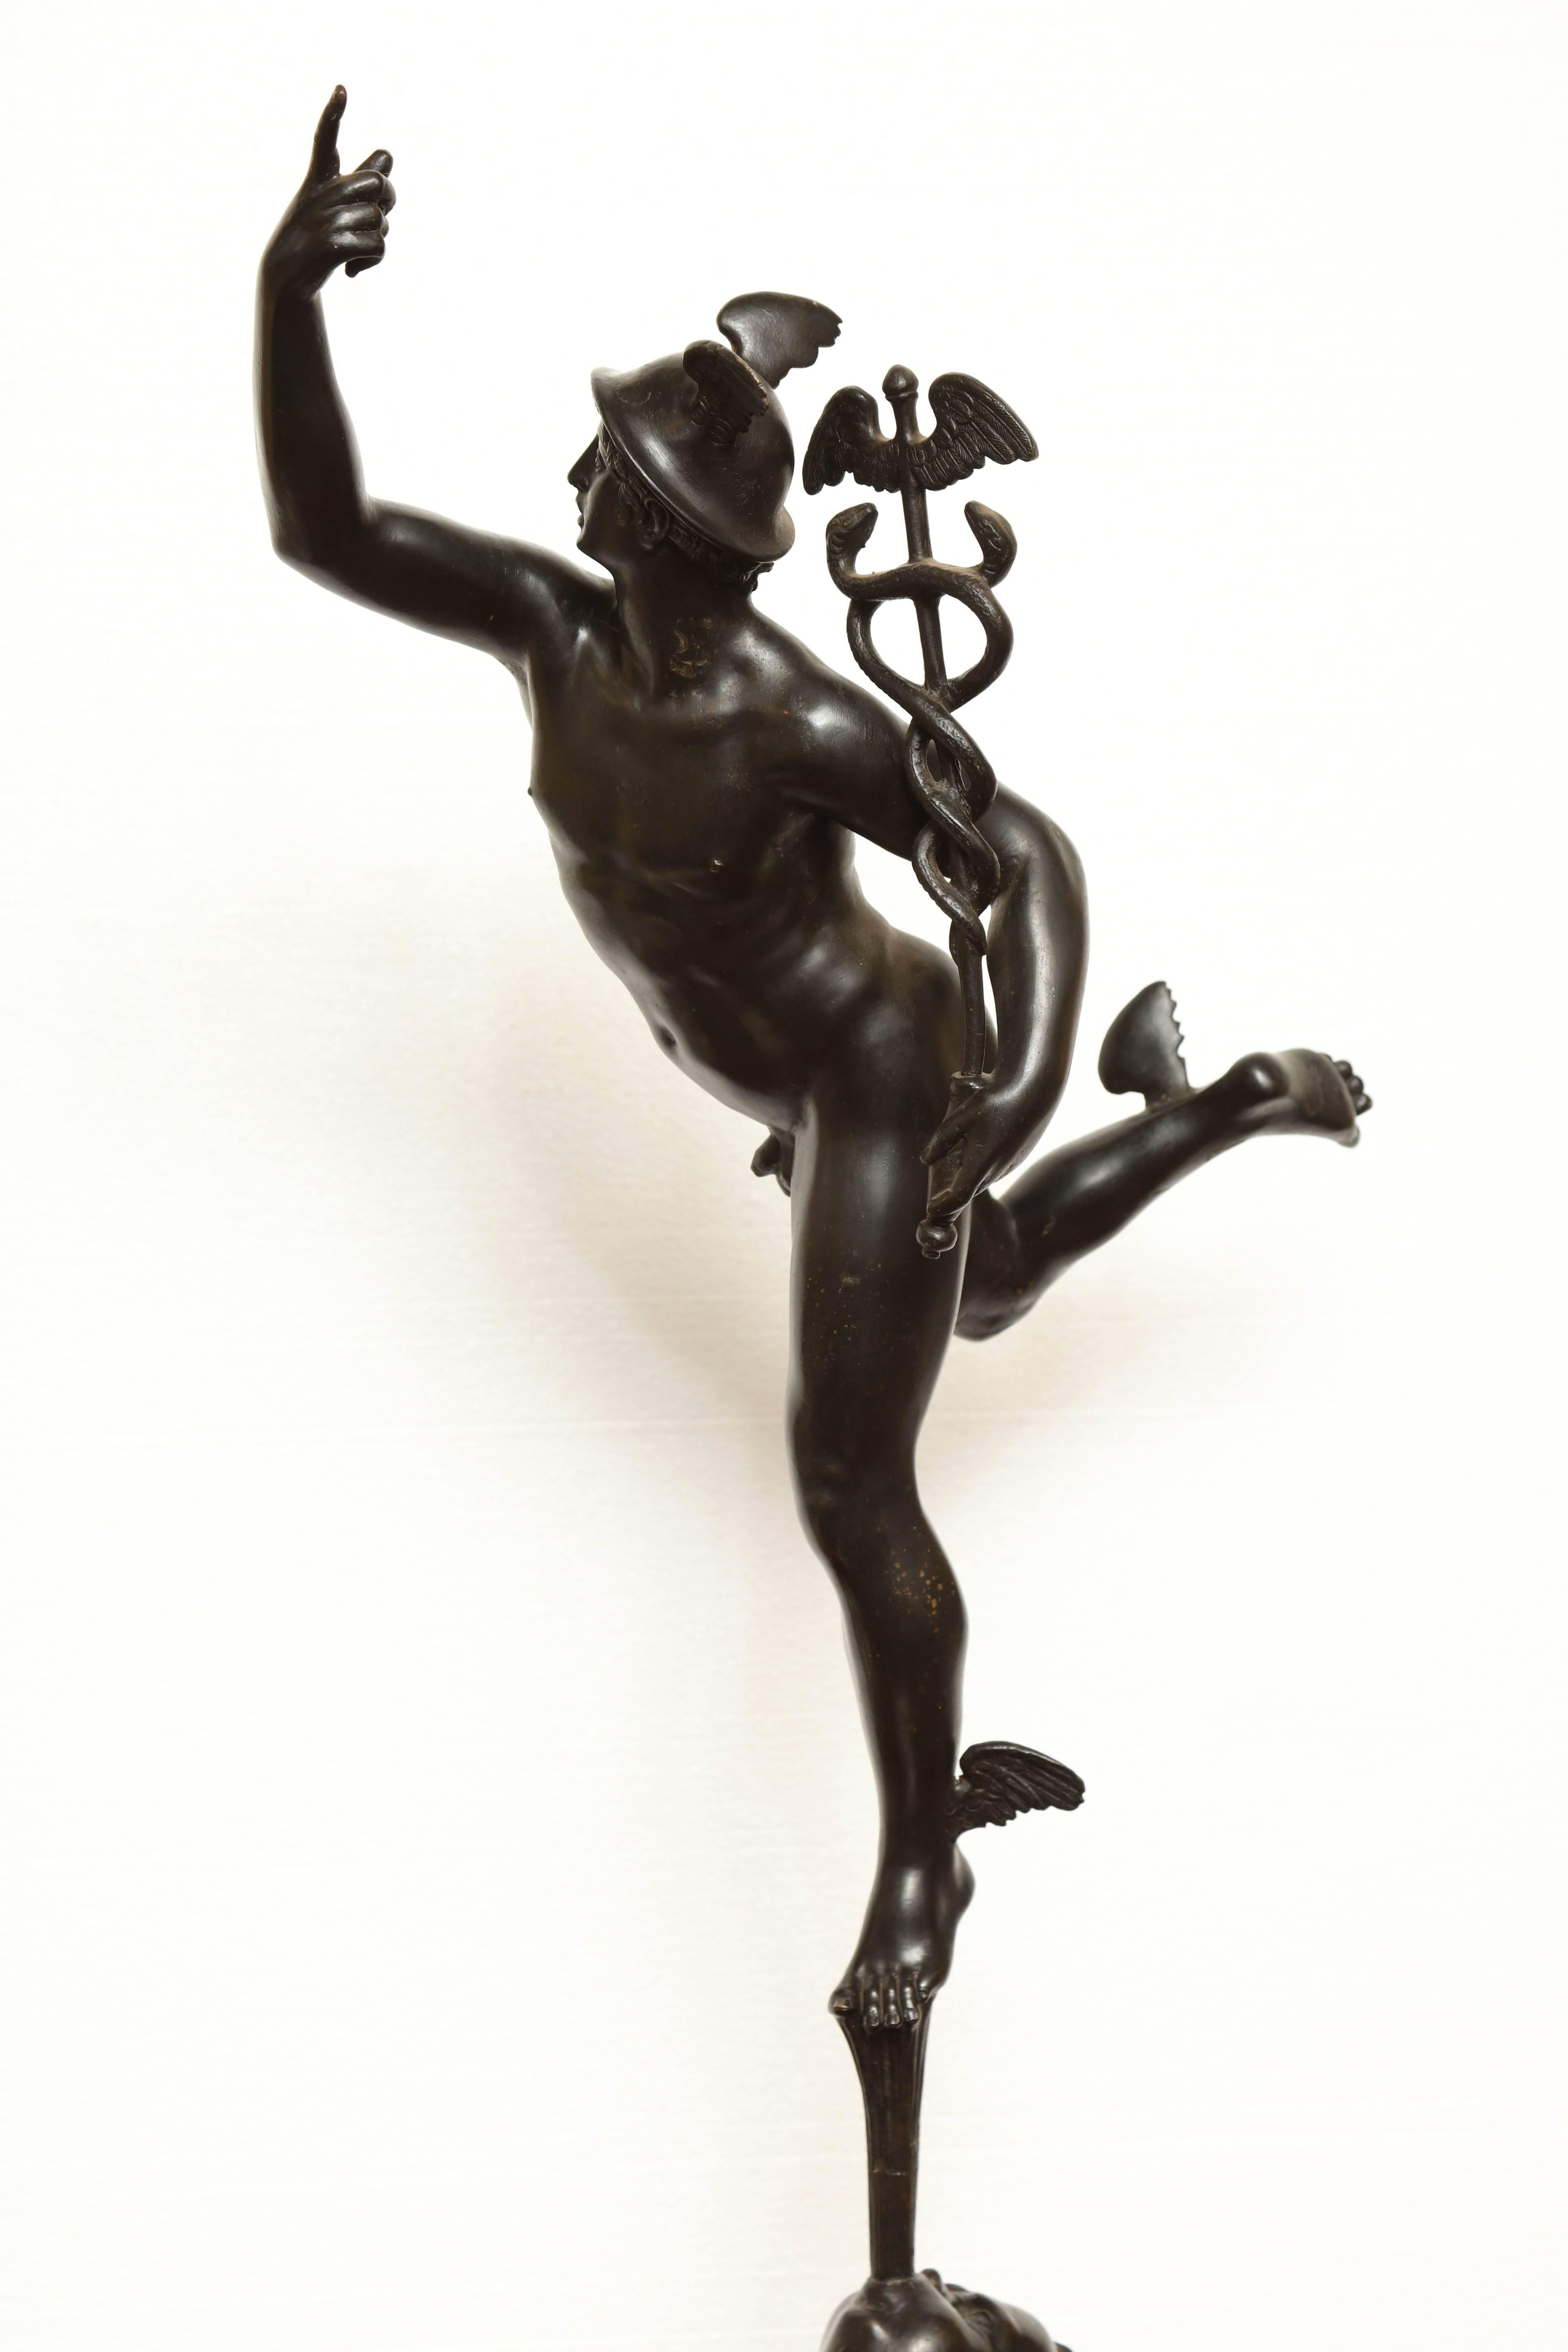 Early 19th century bronze figure of Mercury (Hermes) after Giambologna.